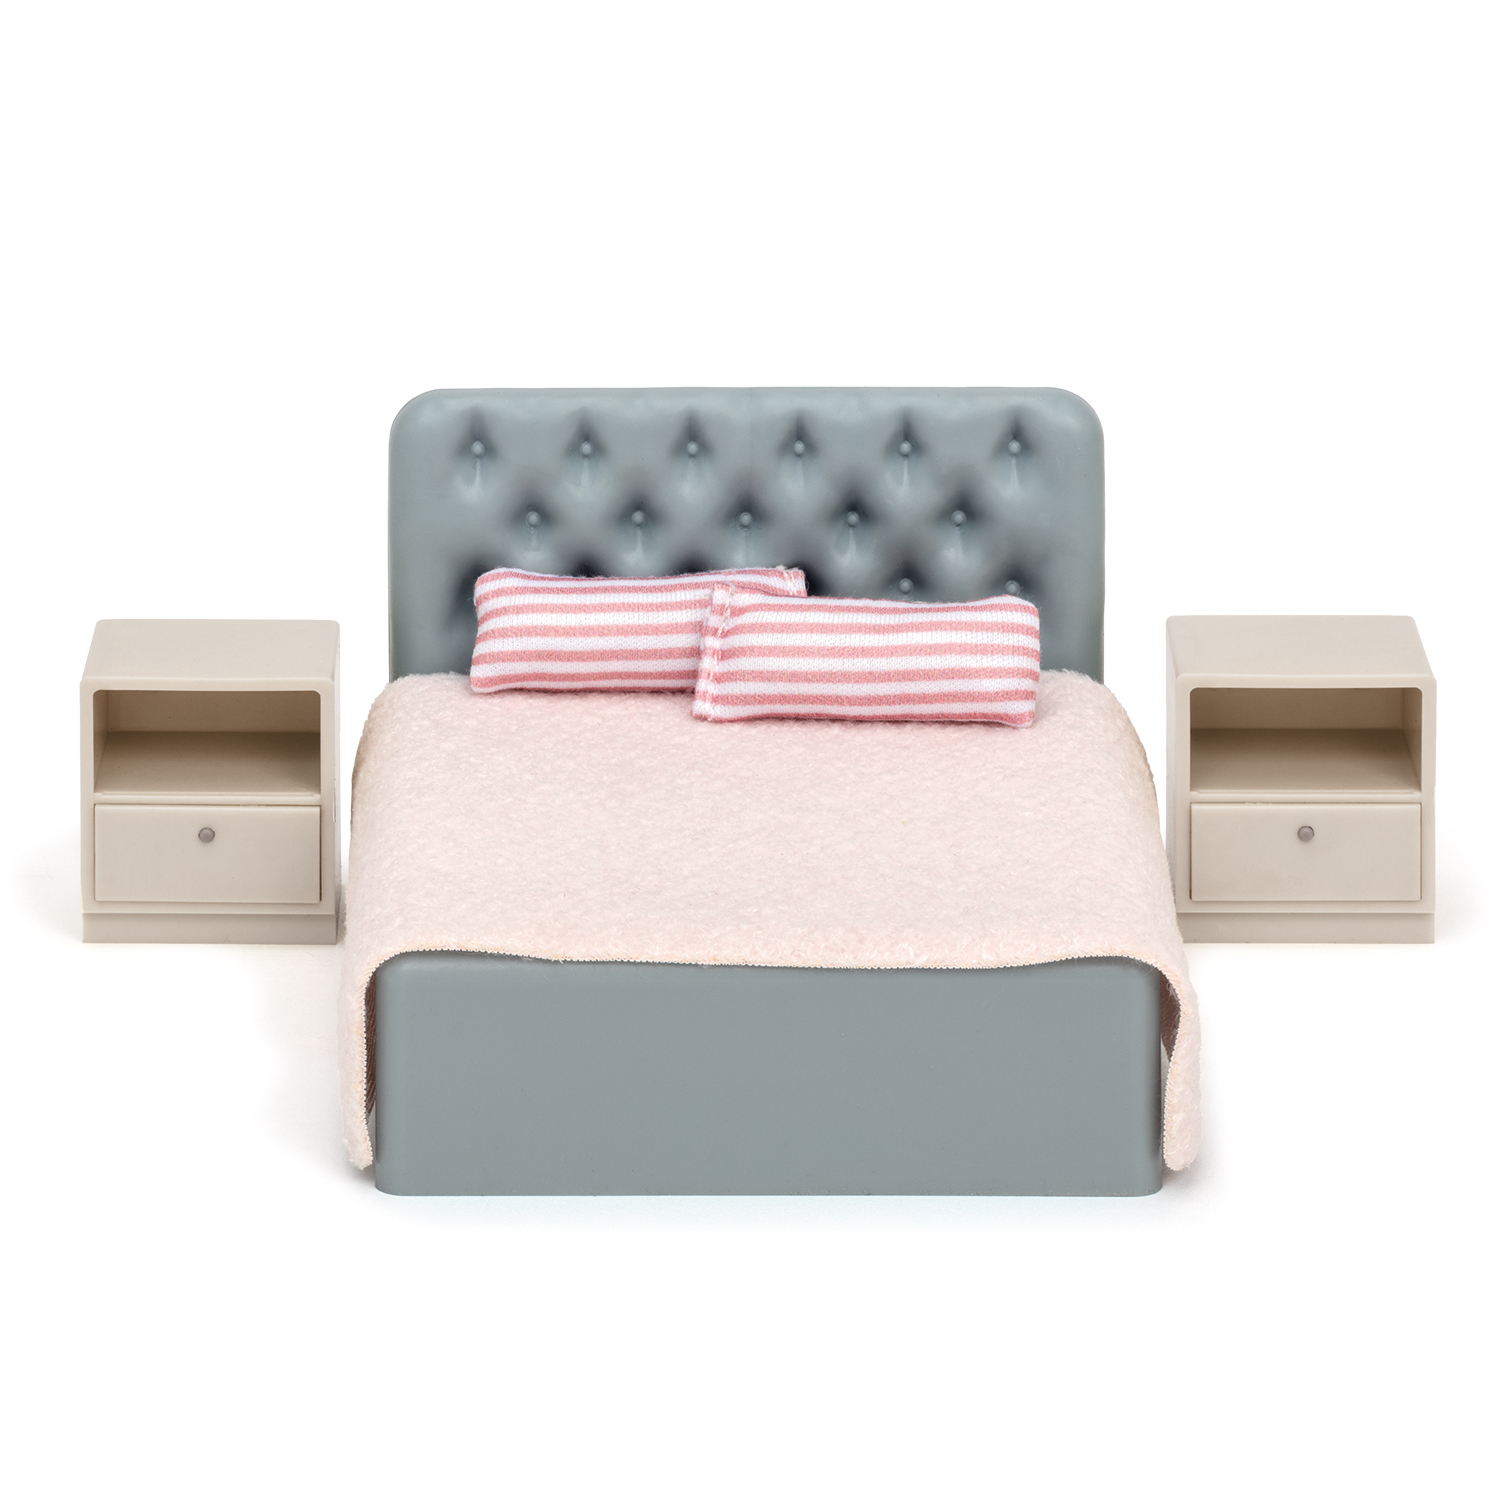 Doll house furniture & doll house accessories lundby dollhouse furniture bedroom set basic